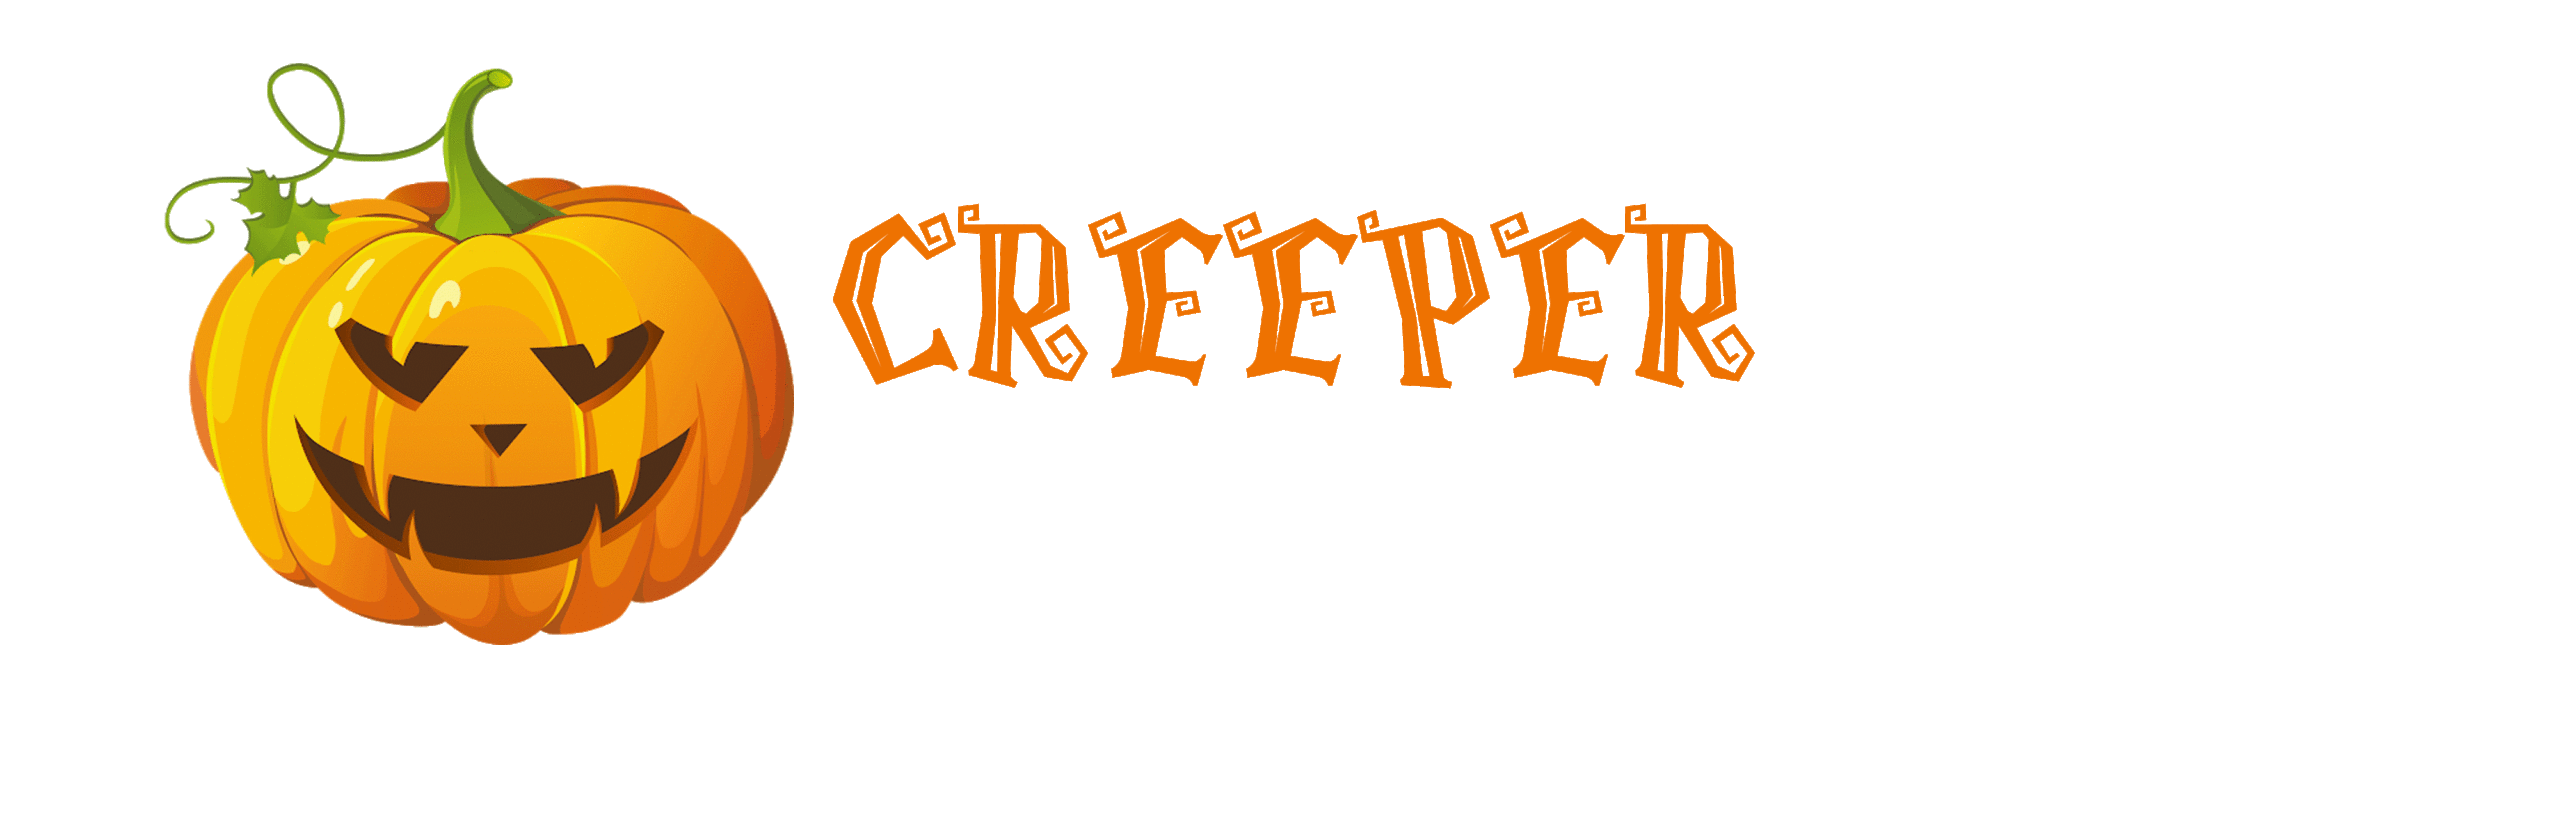 Creeper Features